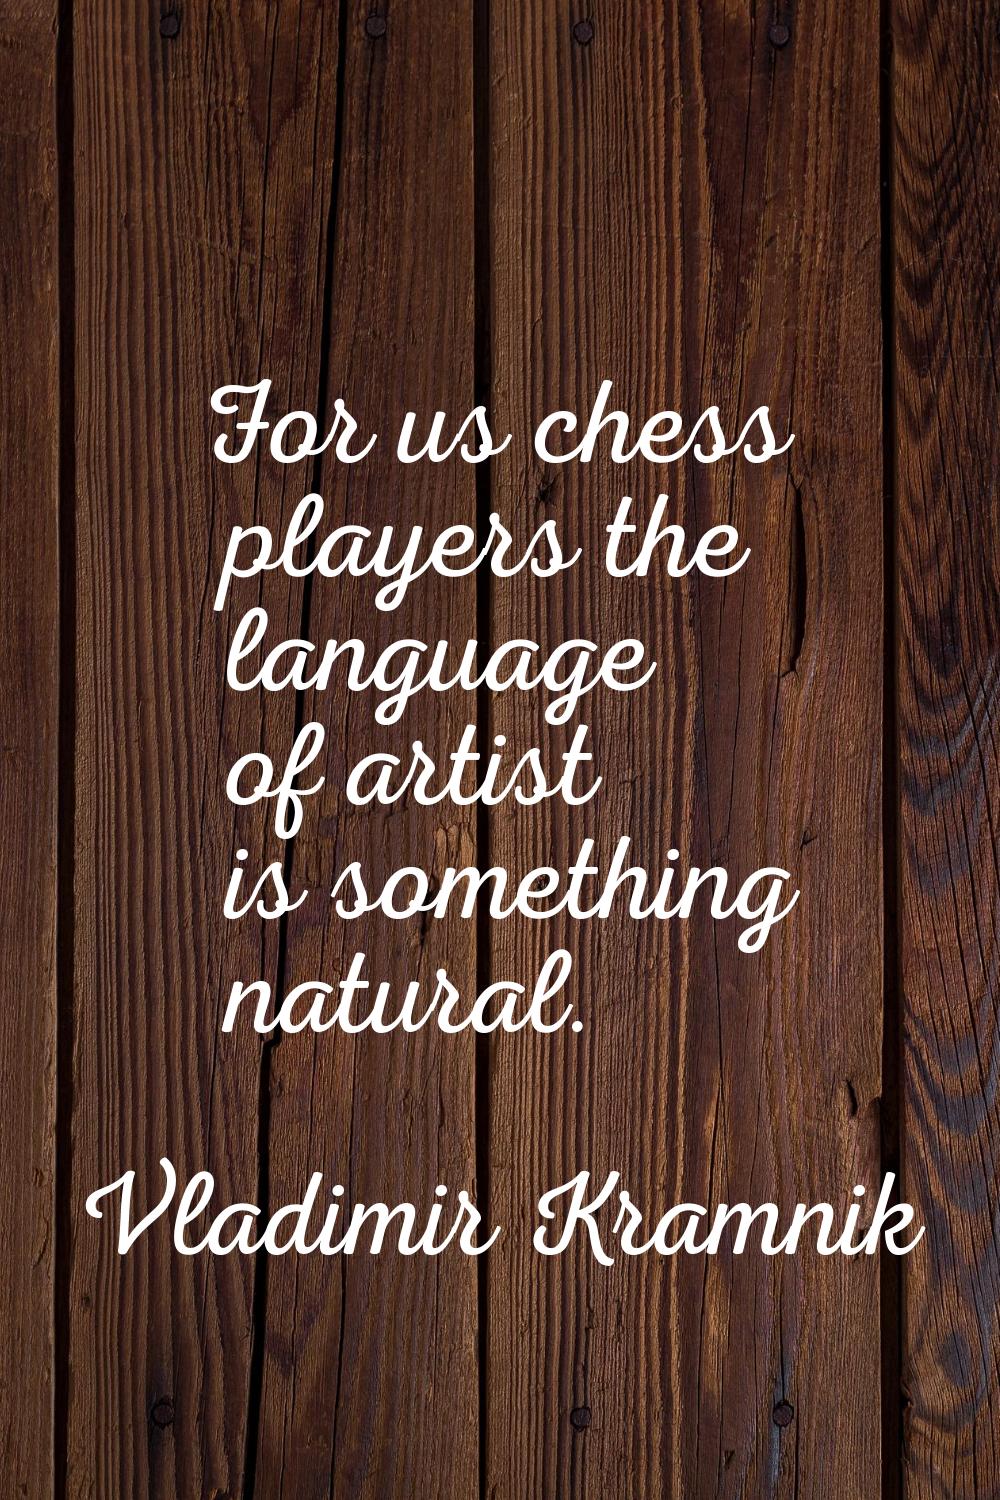 For us chess players the language of artist is something natural.